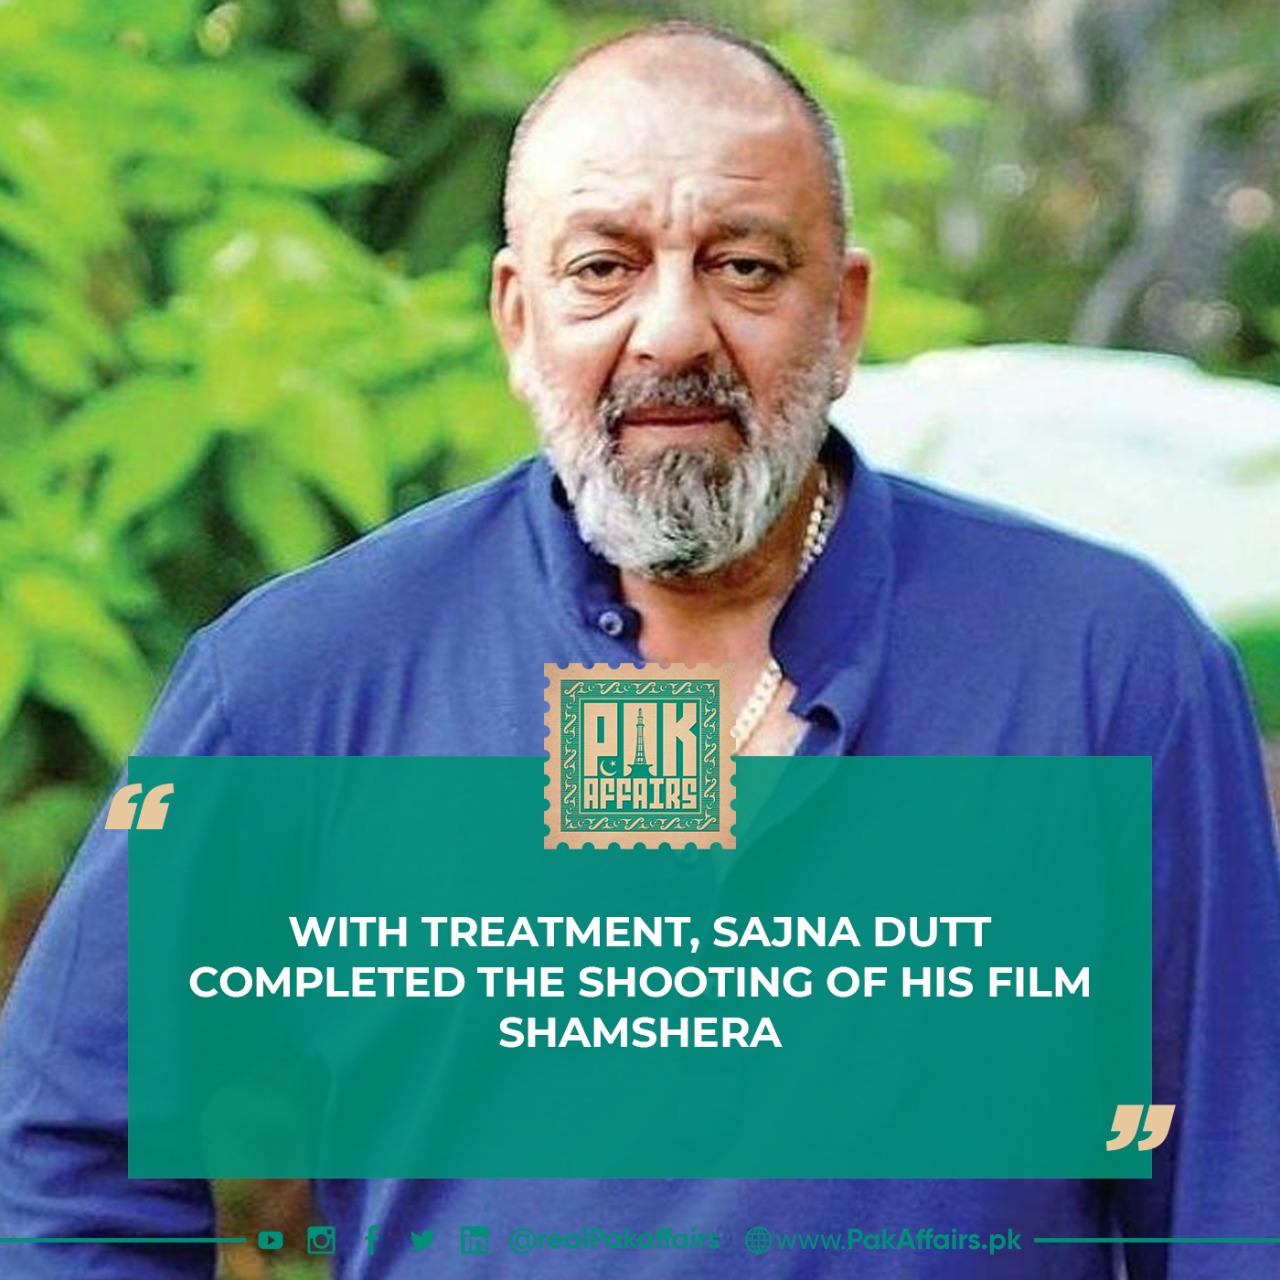 With treatment, Sajna Dutt completed the shooting of his film Shamshera.